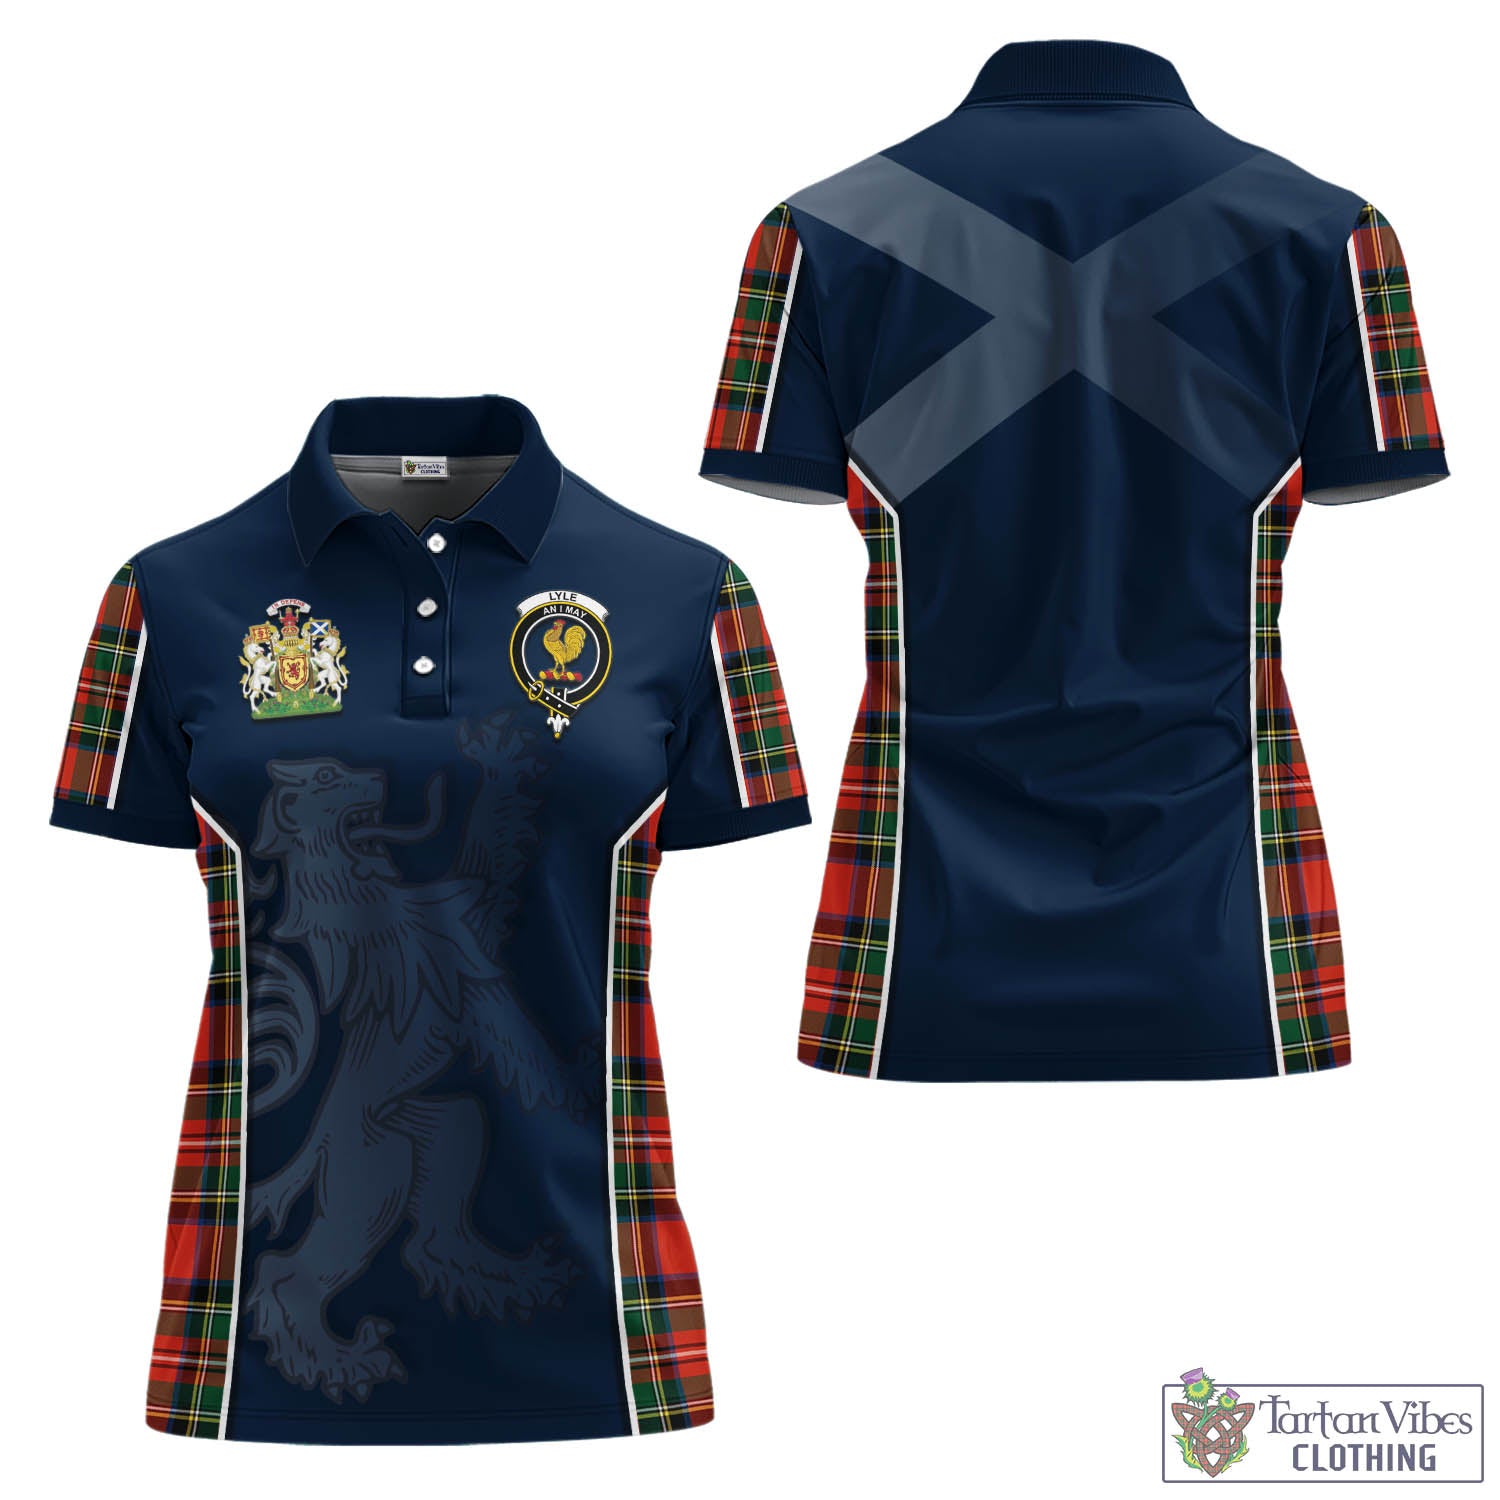 Tartan Vibes Clothing Lyle Tartan Women's Polo Shirt with Family Crest and Lion Rampant Vibes Sport Style